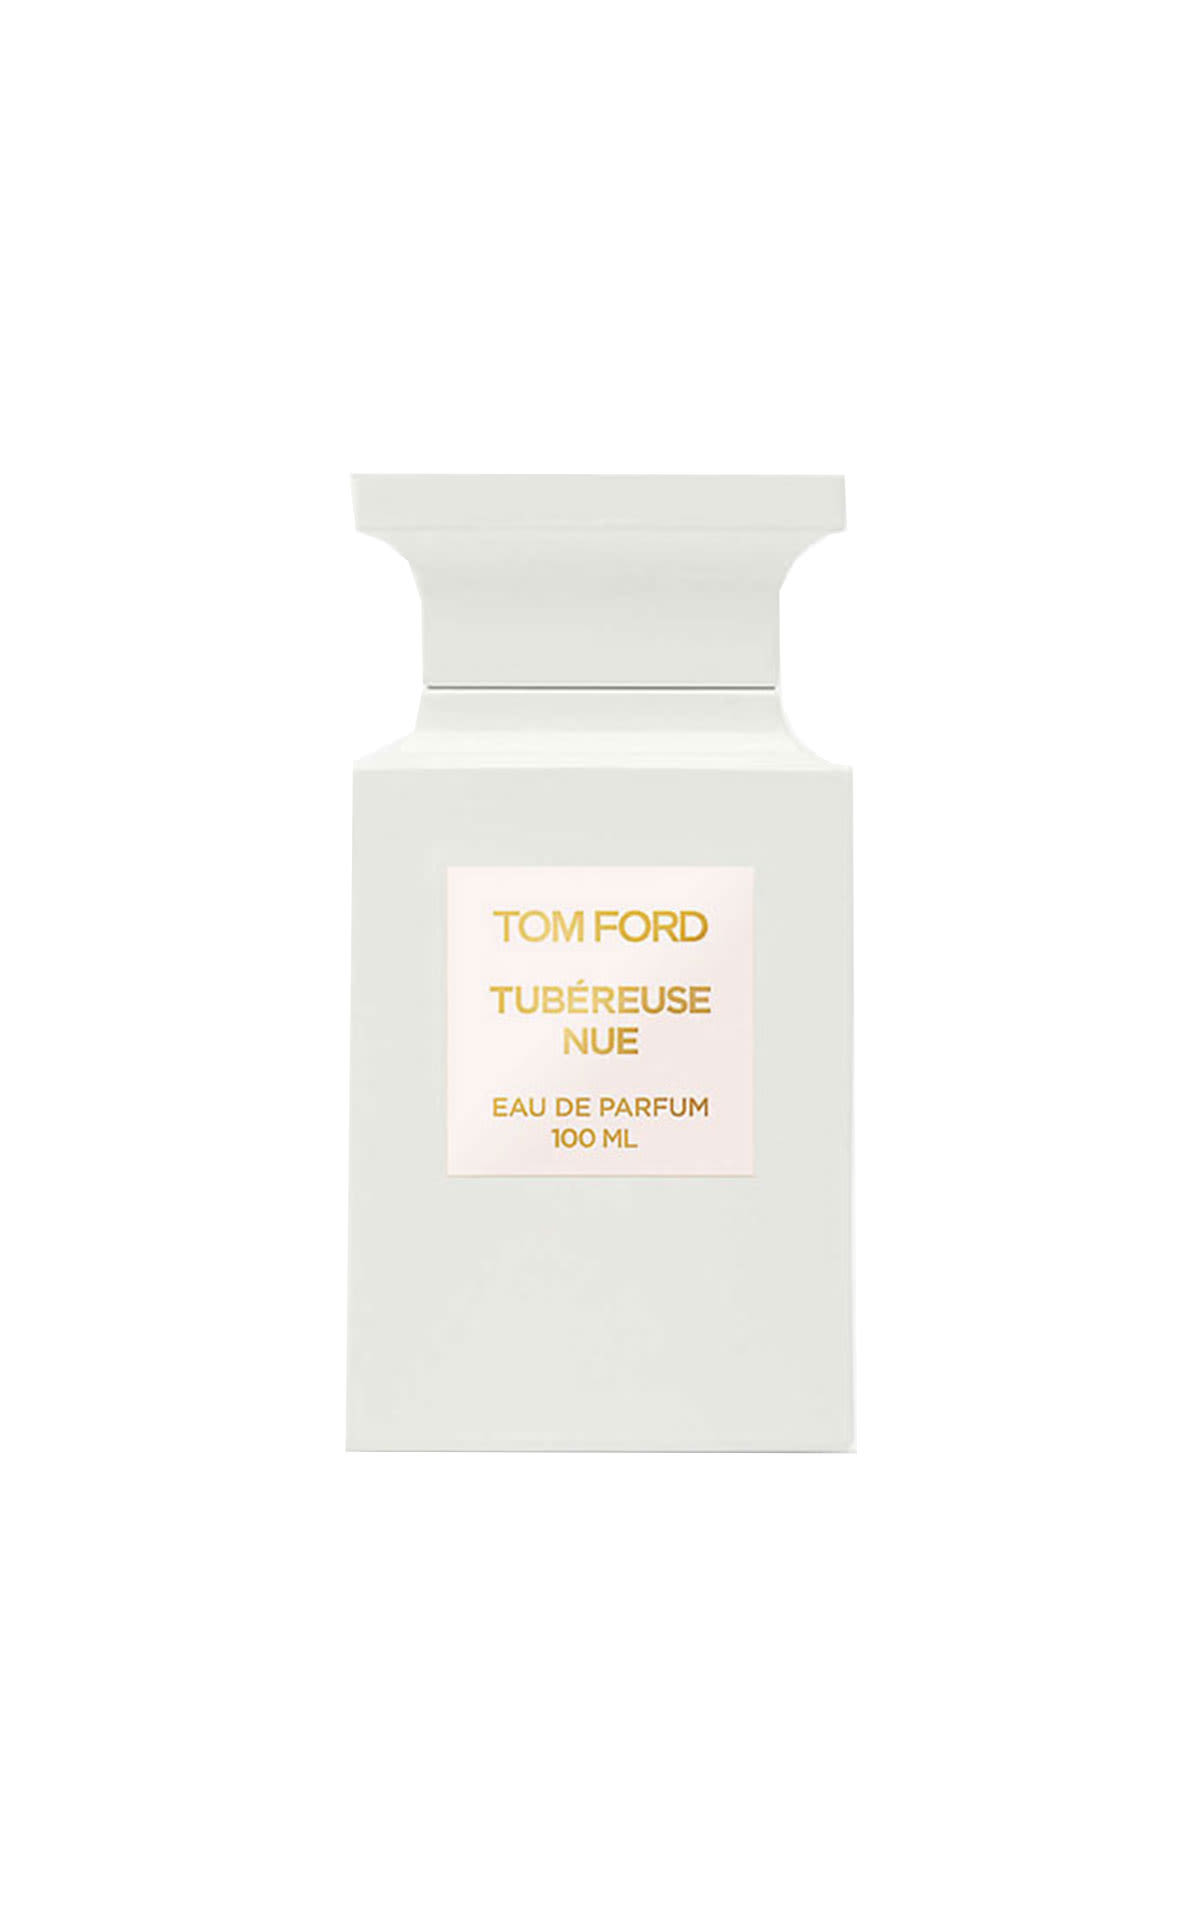 The Cosmetics Company Store Tom Ford Tubereuse nue eau de parfum 100ml from Bicester Village